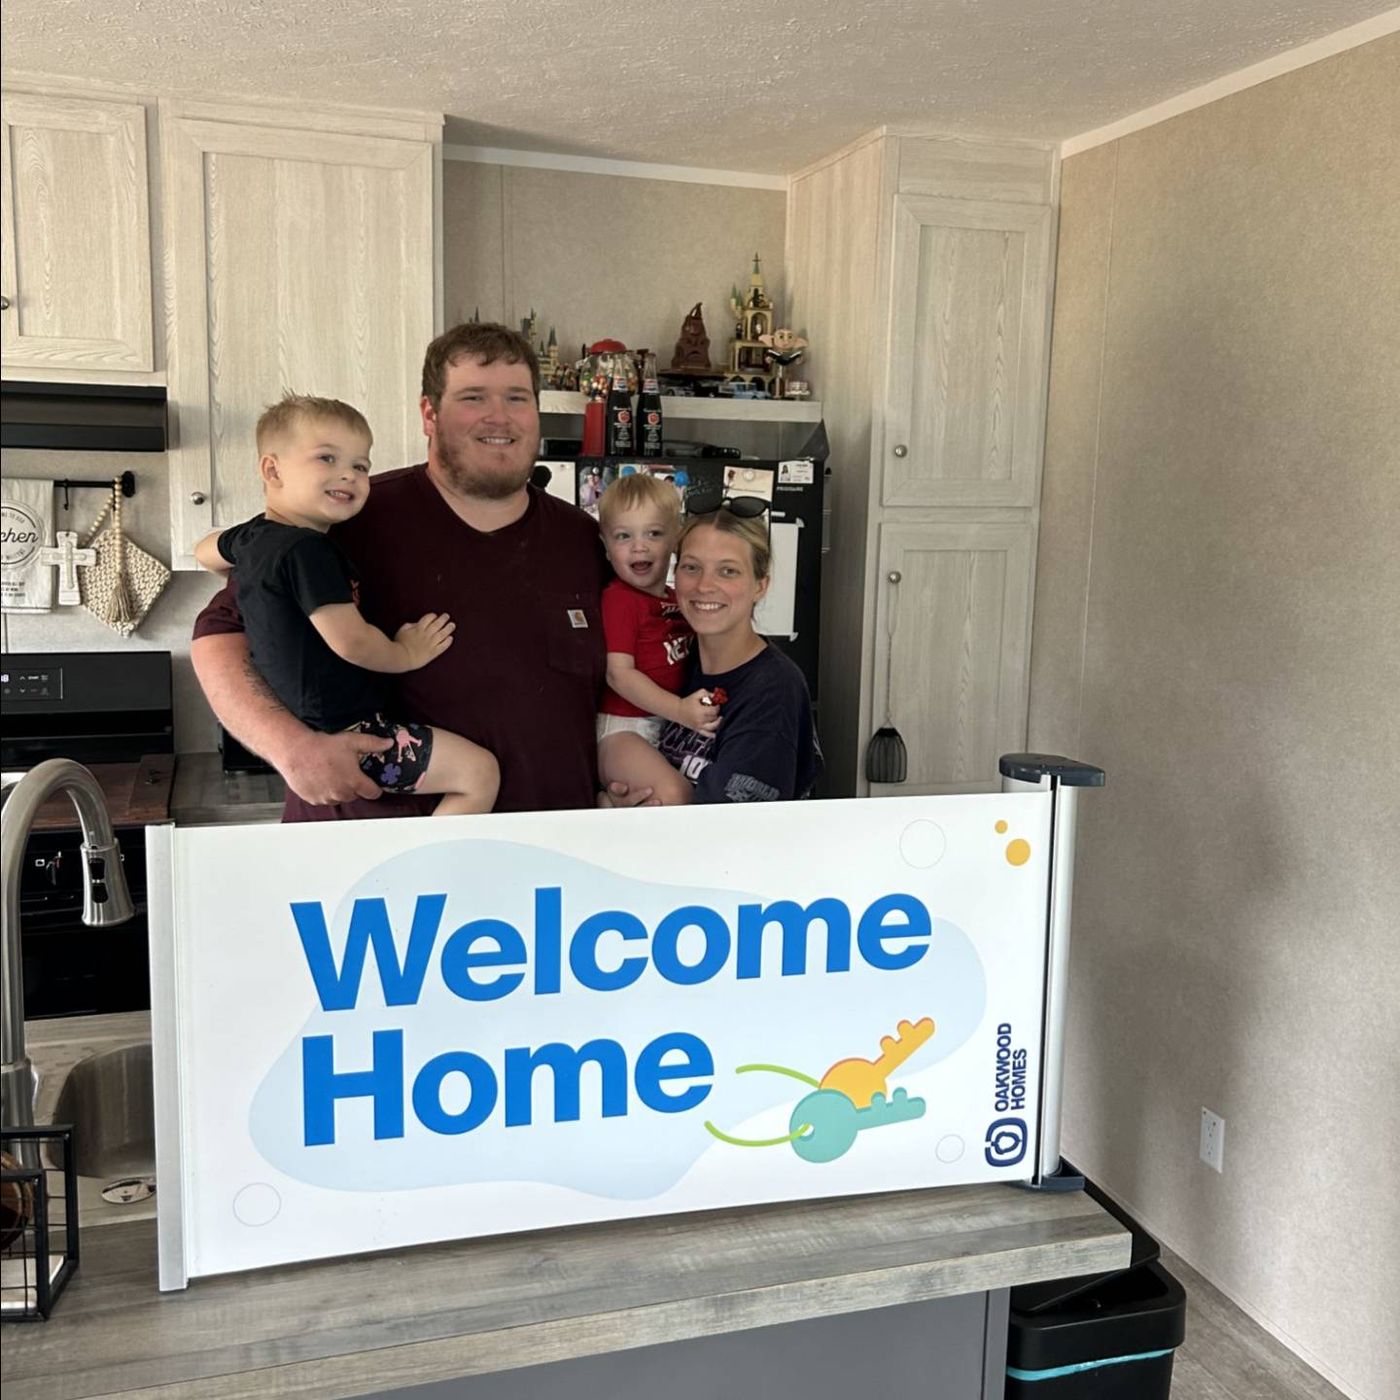 DEVIN L. welcome home image